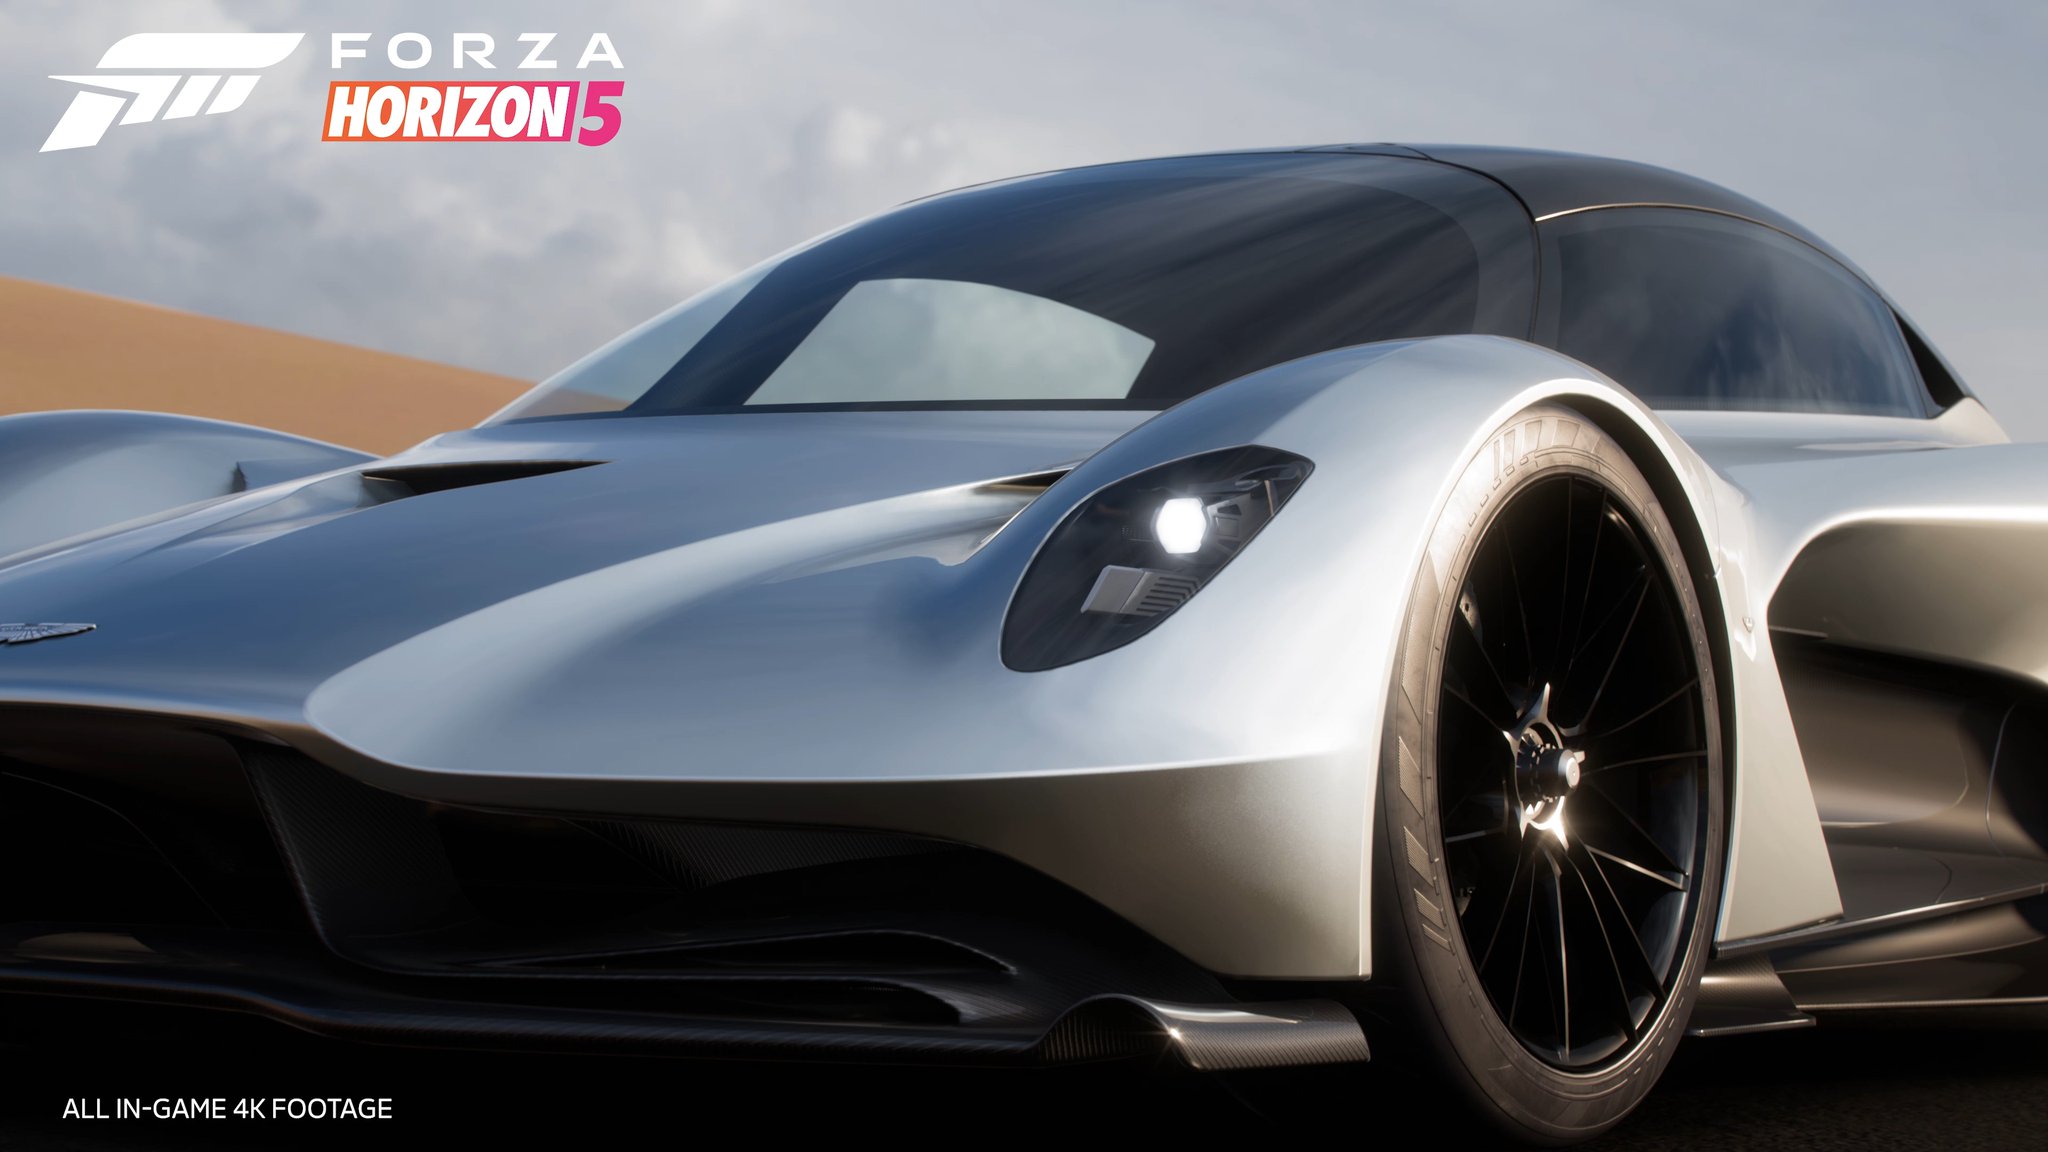 Forza Horizon Fuels The 2019 Valhalla Concept Car. Experience This Mid Engine, Twin Turbo Hybrid V8 Hypercar On The Streets Of Mexico In #ForzaHorizon5 On Day One. A Truly Harmonious